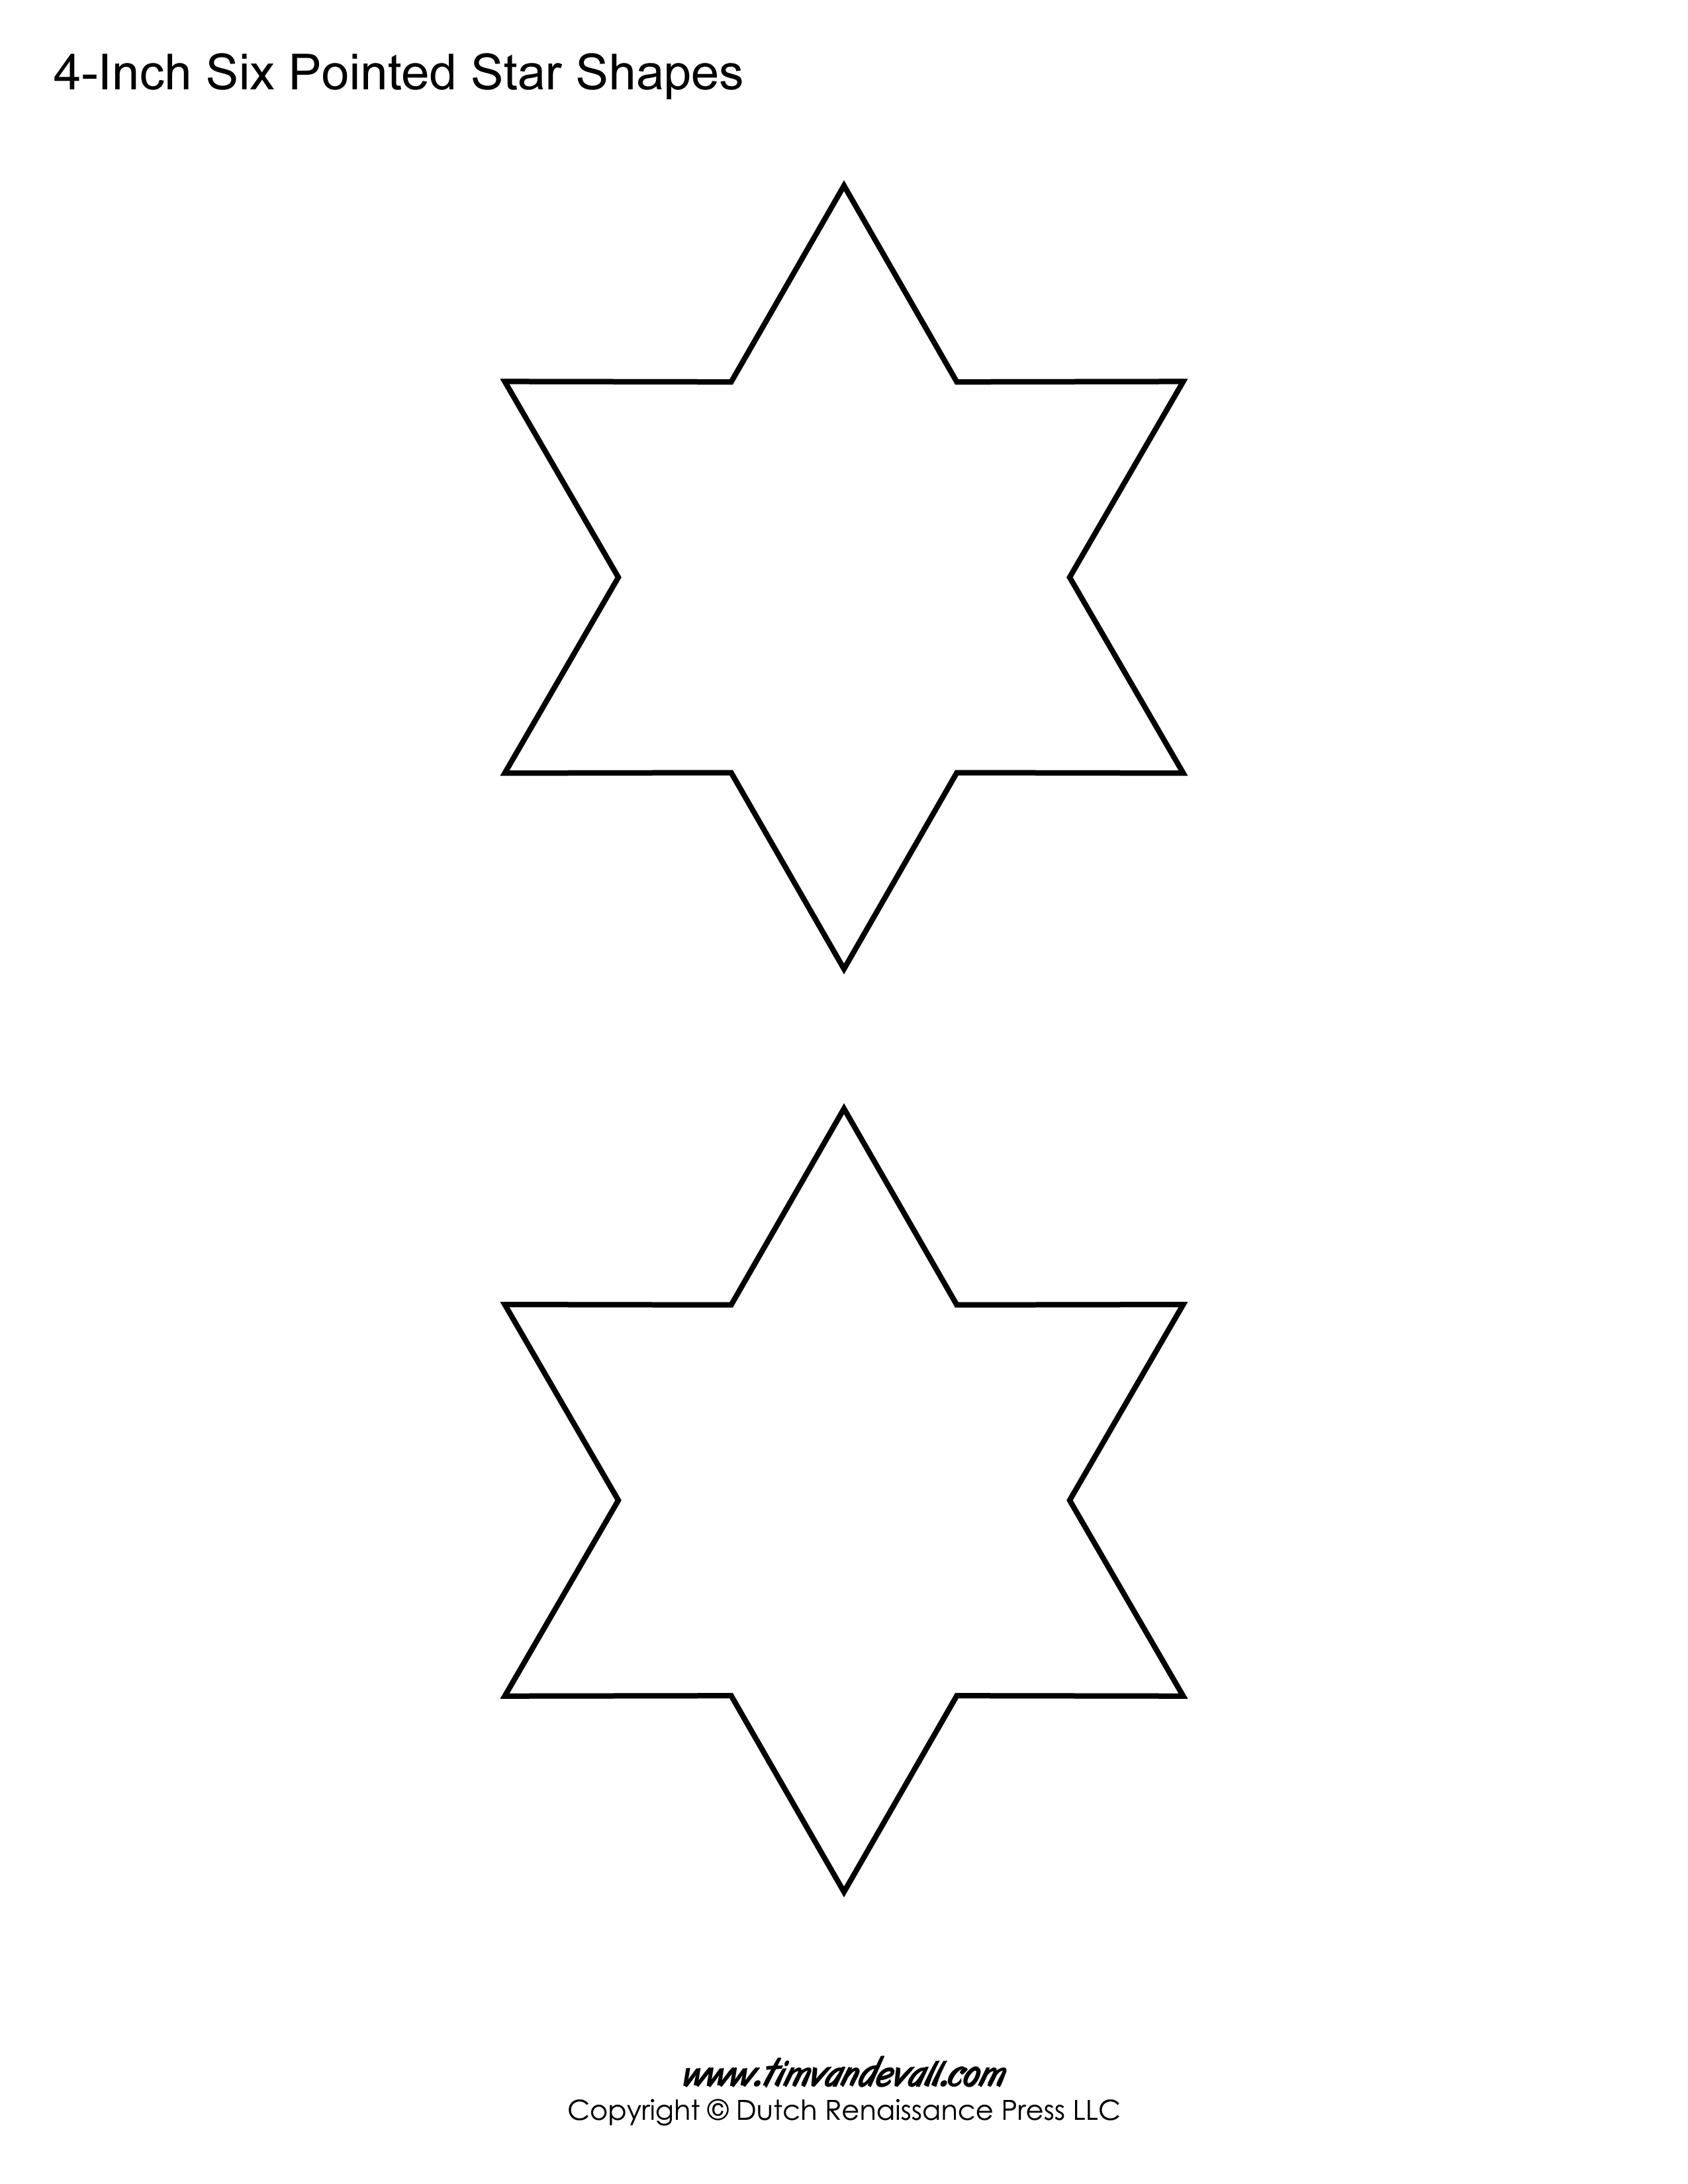 Printable Six Pointed Star Templates | Blank Shape Pdf Downloads - Printable Star Puzzle